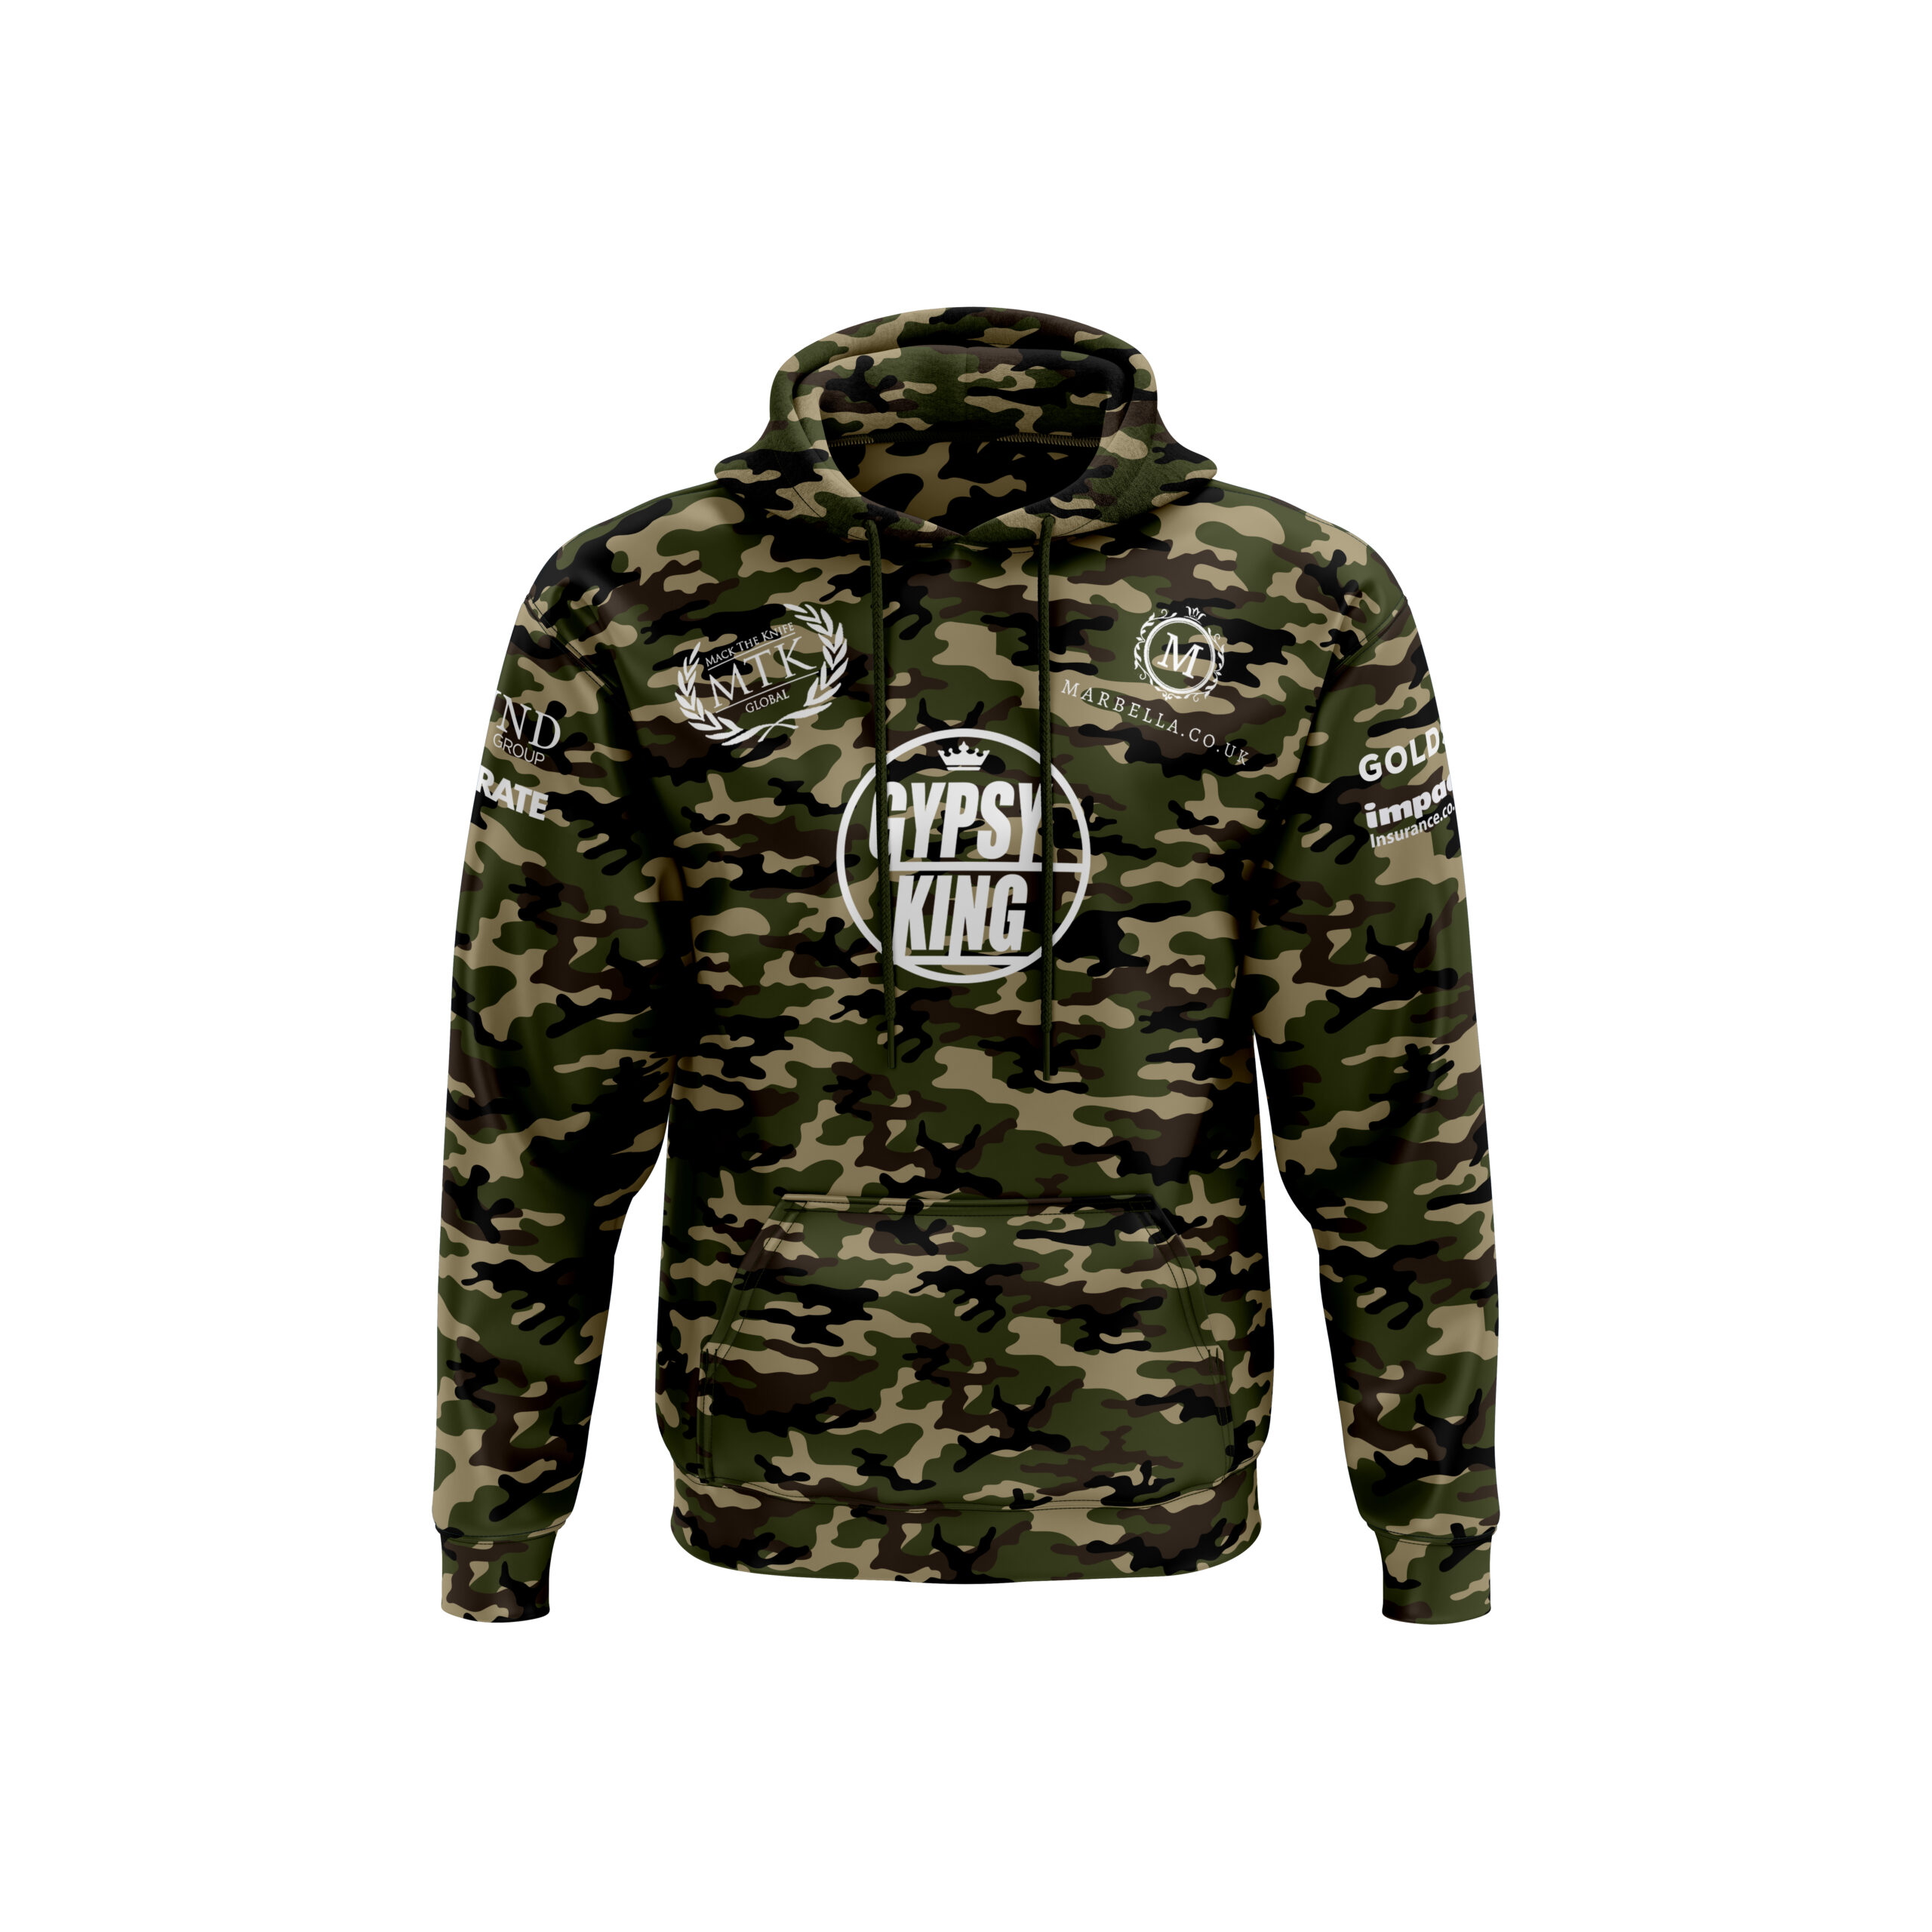 Gypsy King Camouflage Hoodie - Tyson Fury Official Merchandise